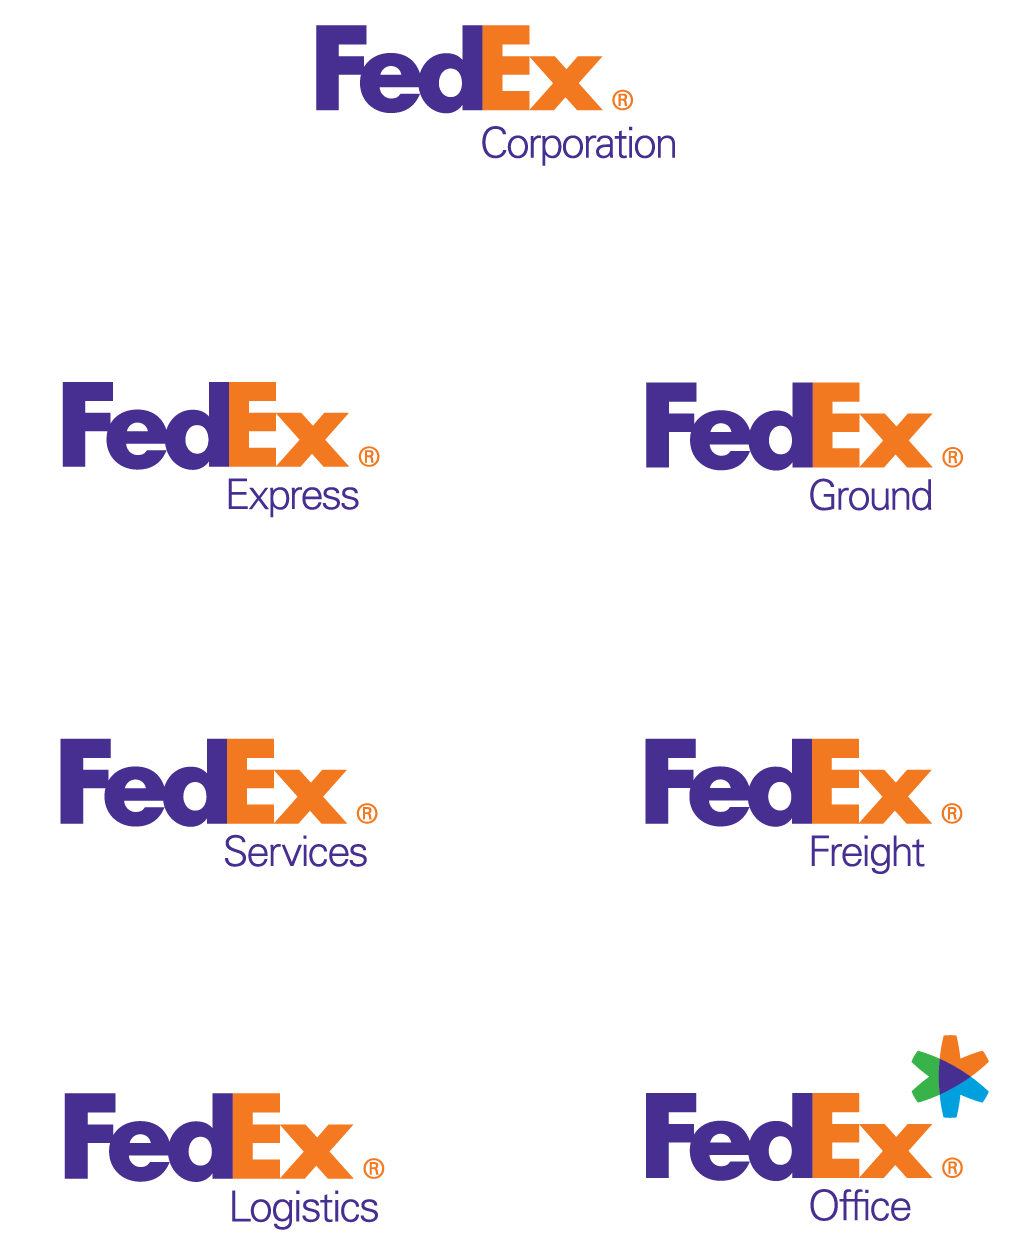 FedEx Corp Logo - Company Structure and Facts - About FedEx